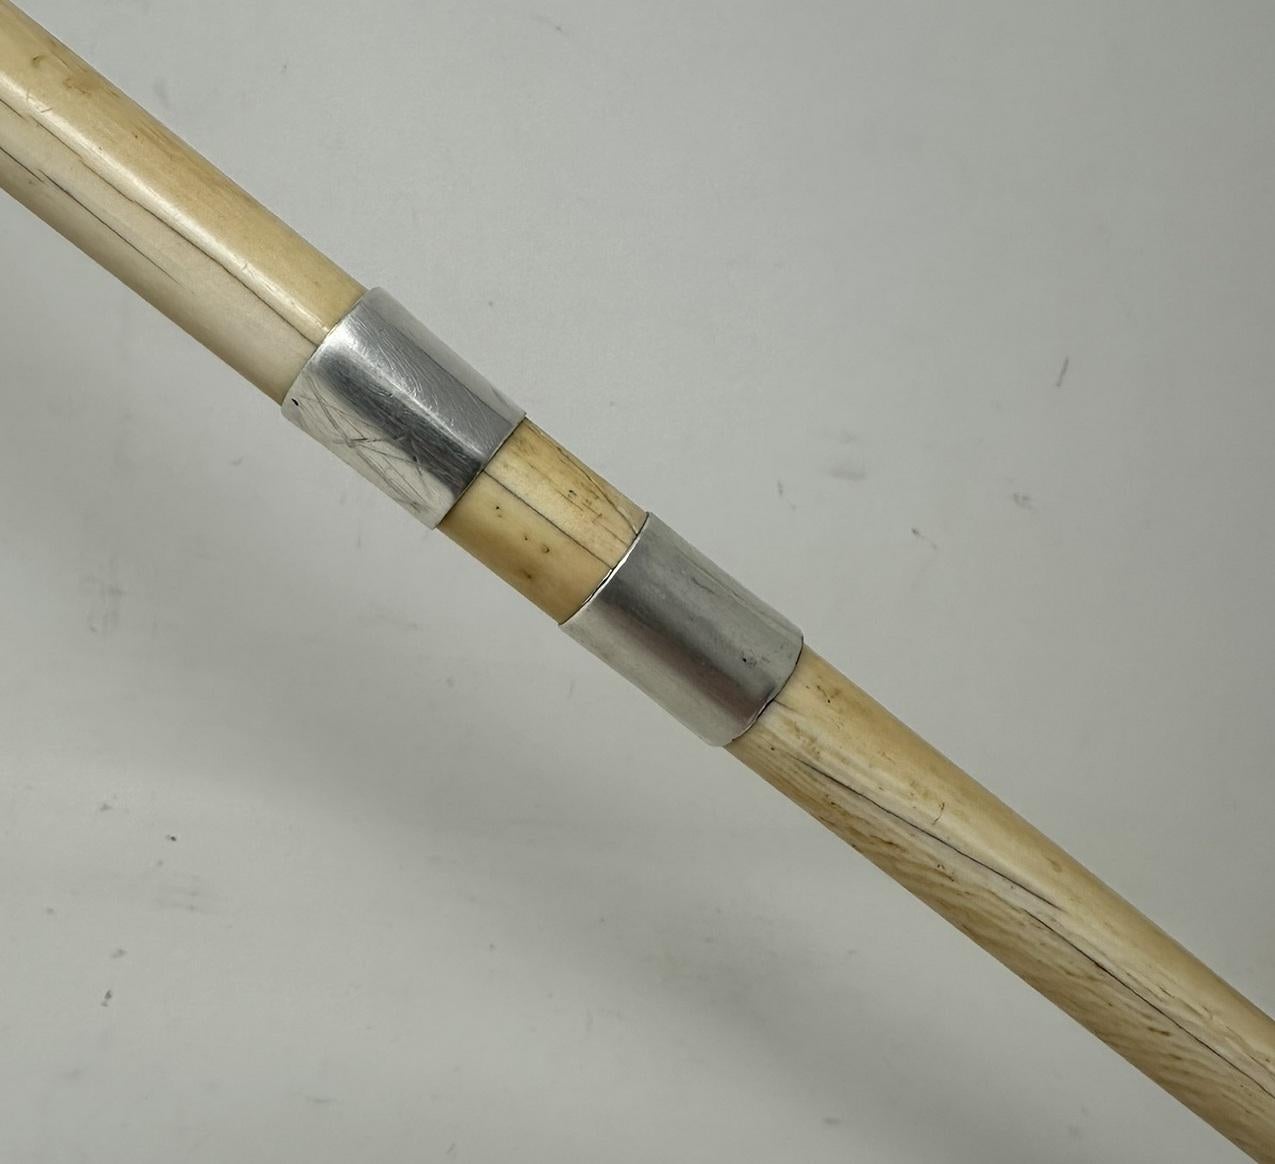 Antique Victorian Vintage Ivory Bovine Whale Bone Walking Swagger Stick Cane   In Good Condition For Sale In Dublin, Ireland